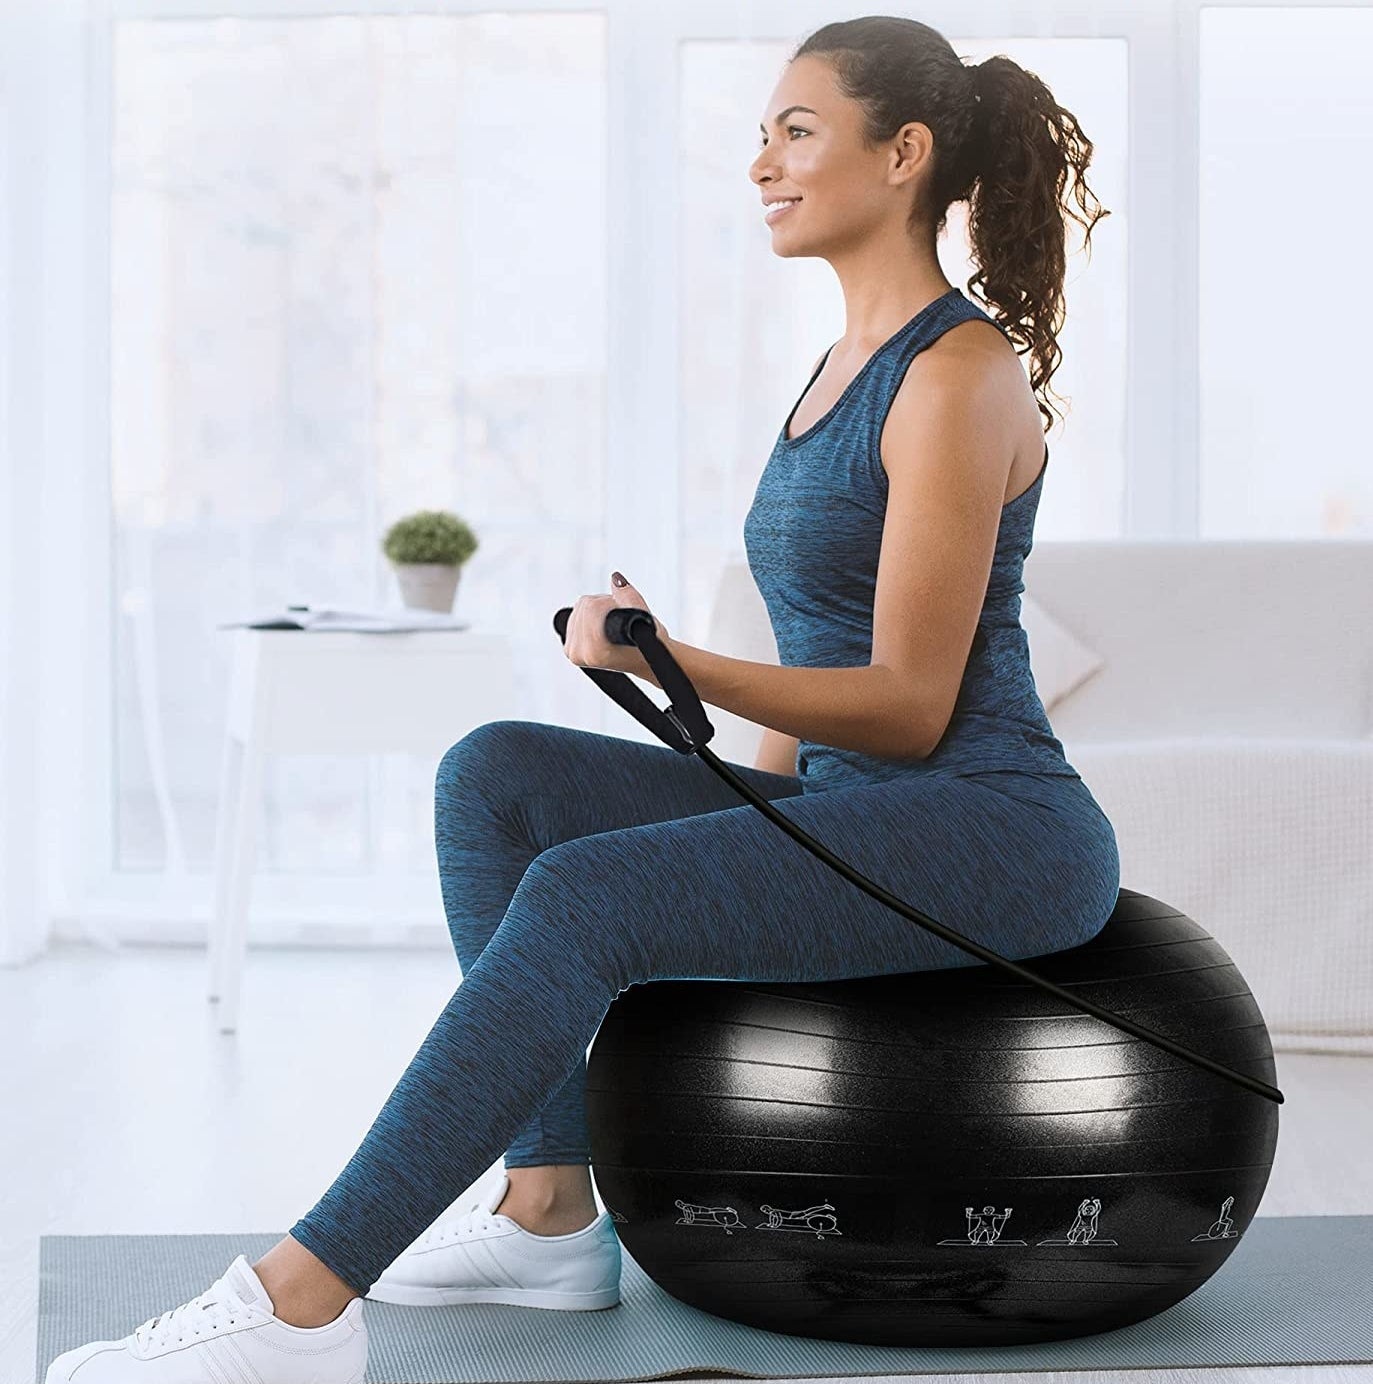 a person sitting on the exercise ball while holding a resistance band